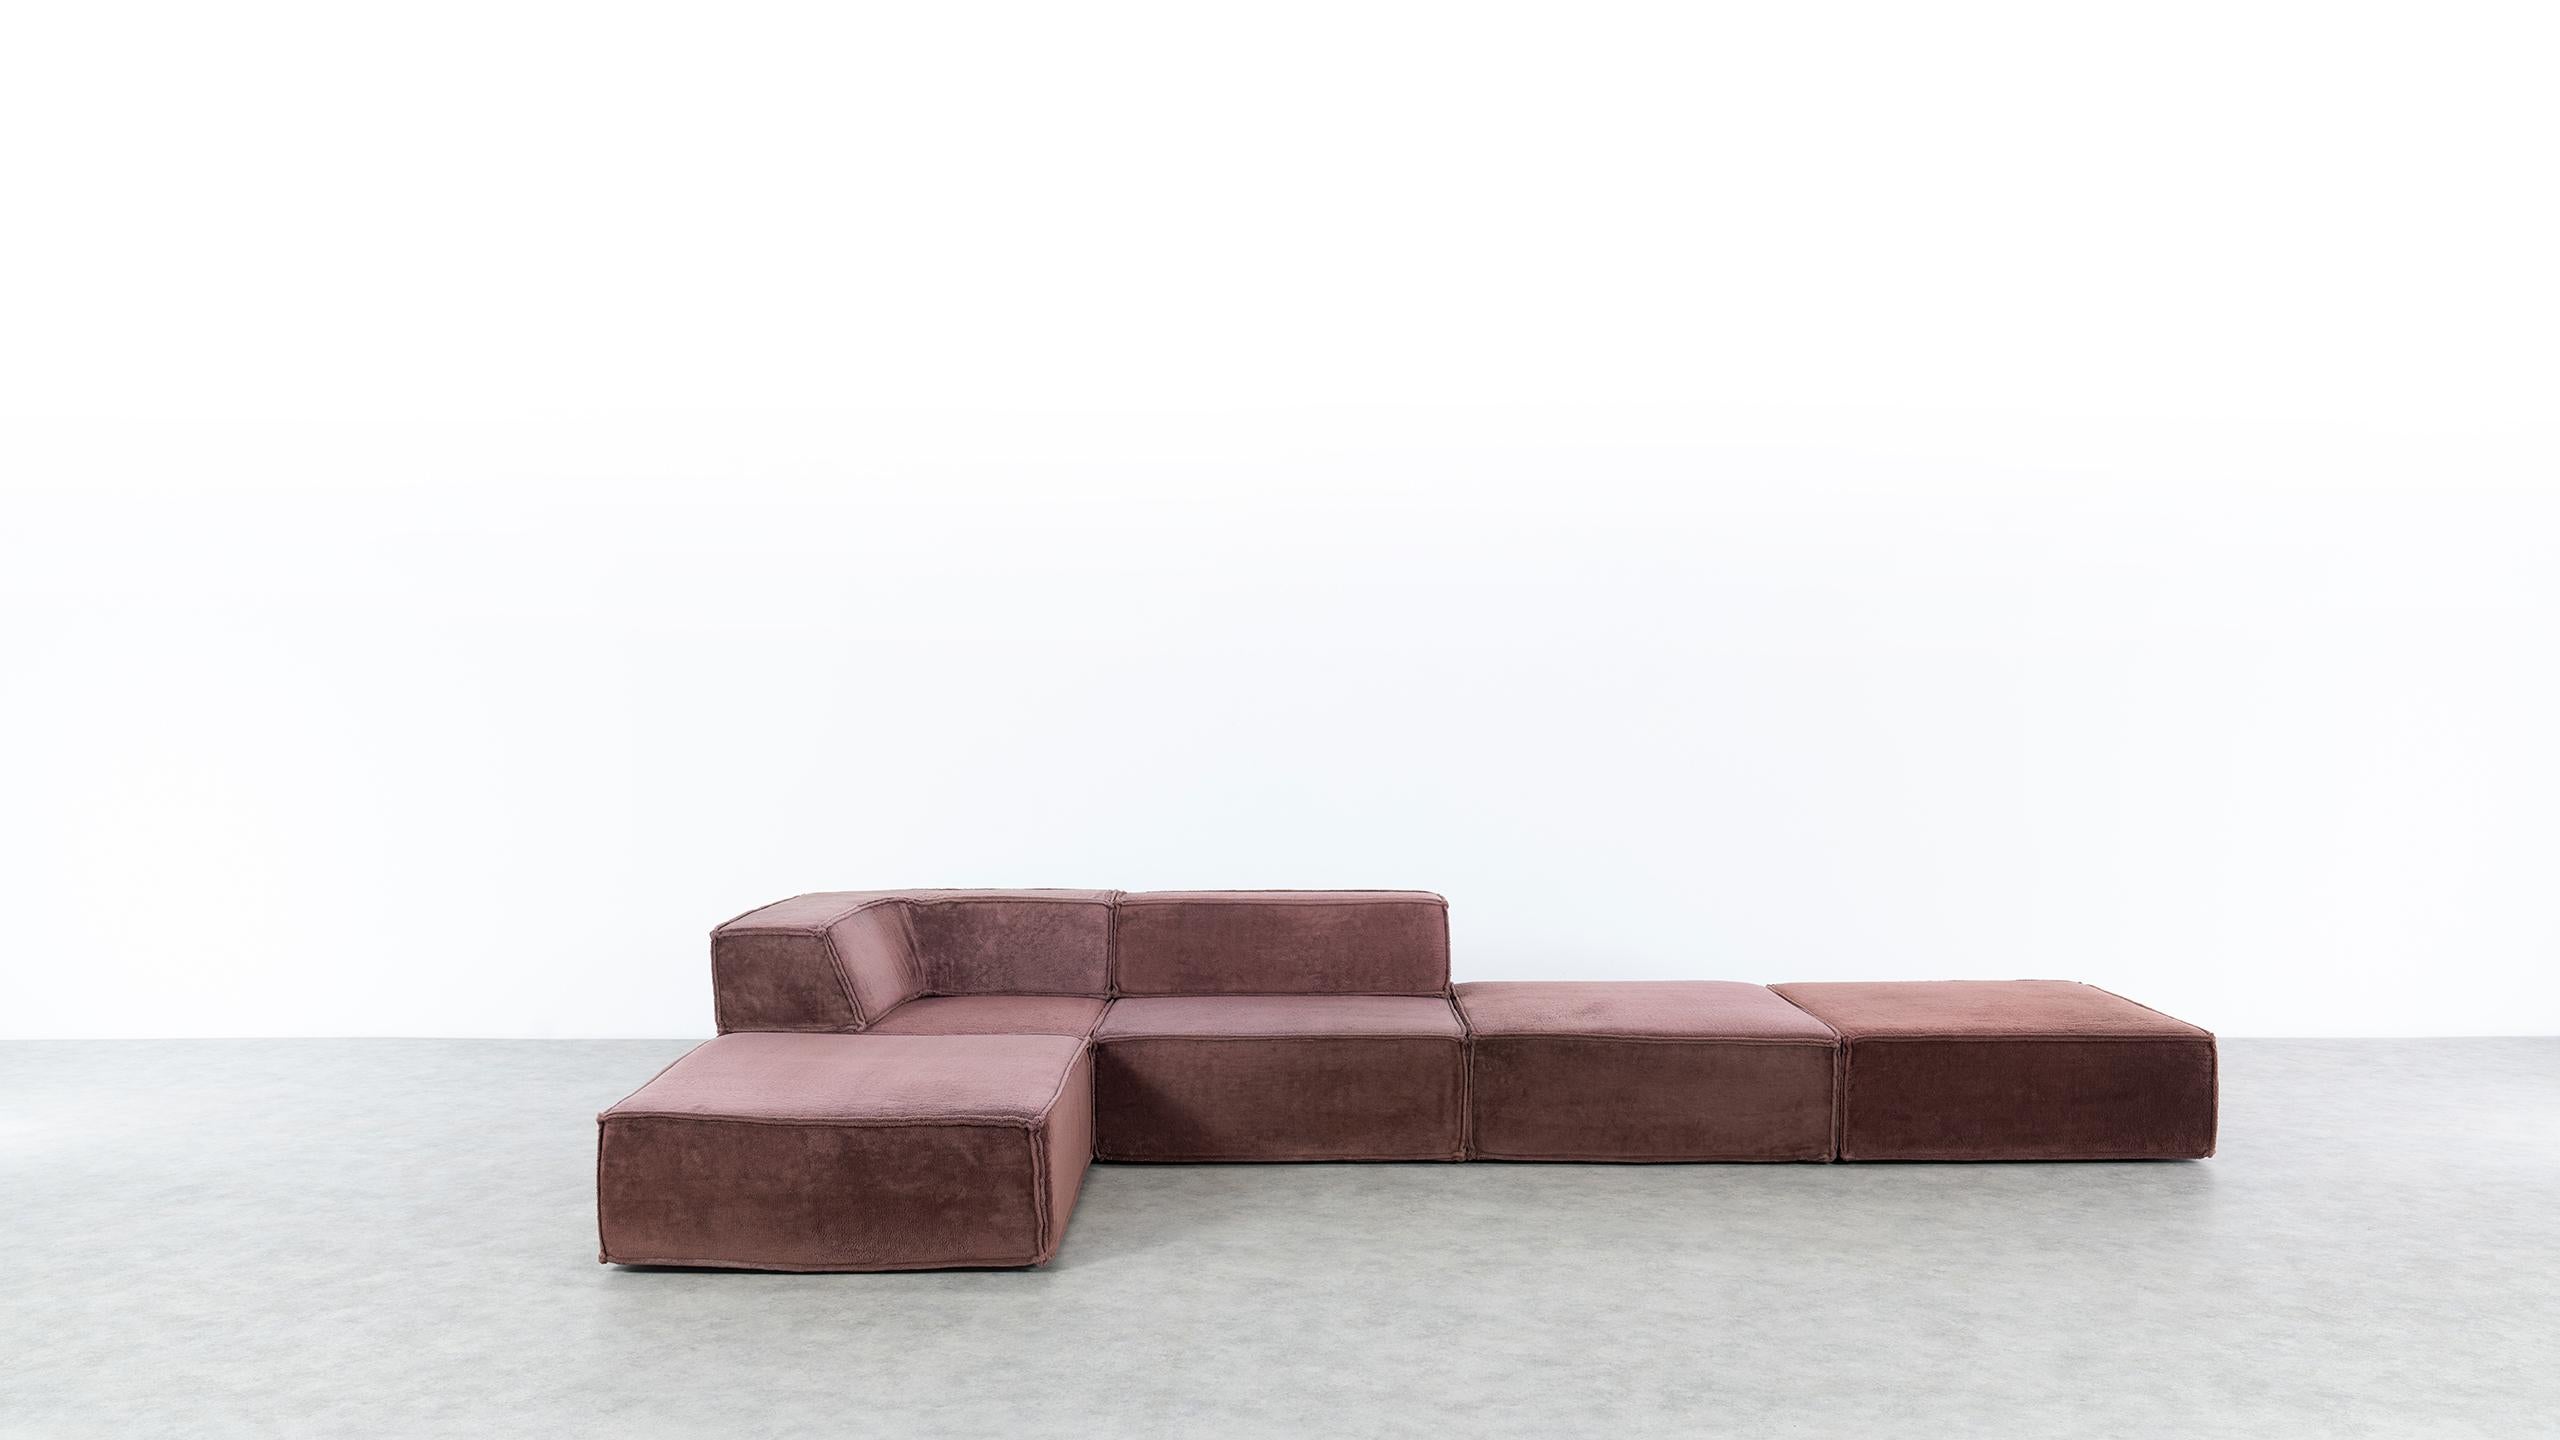 Late 20th Century COR Trio Modular Sofa, Giant Landscape in Brown, 1972 by Team Form AG, Swiss